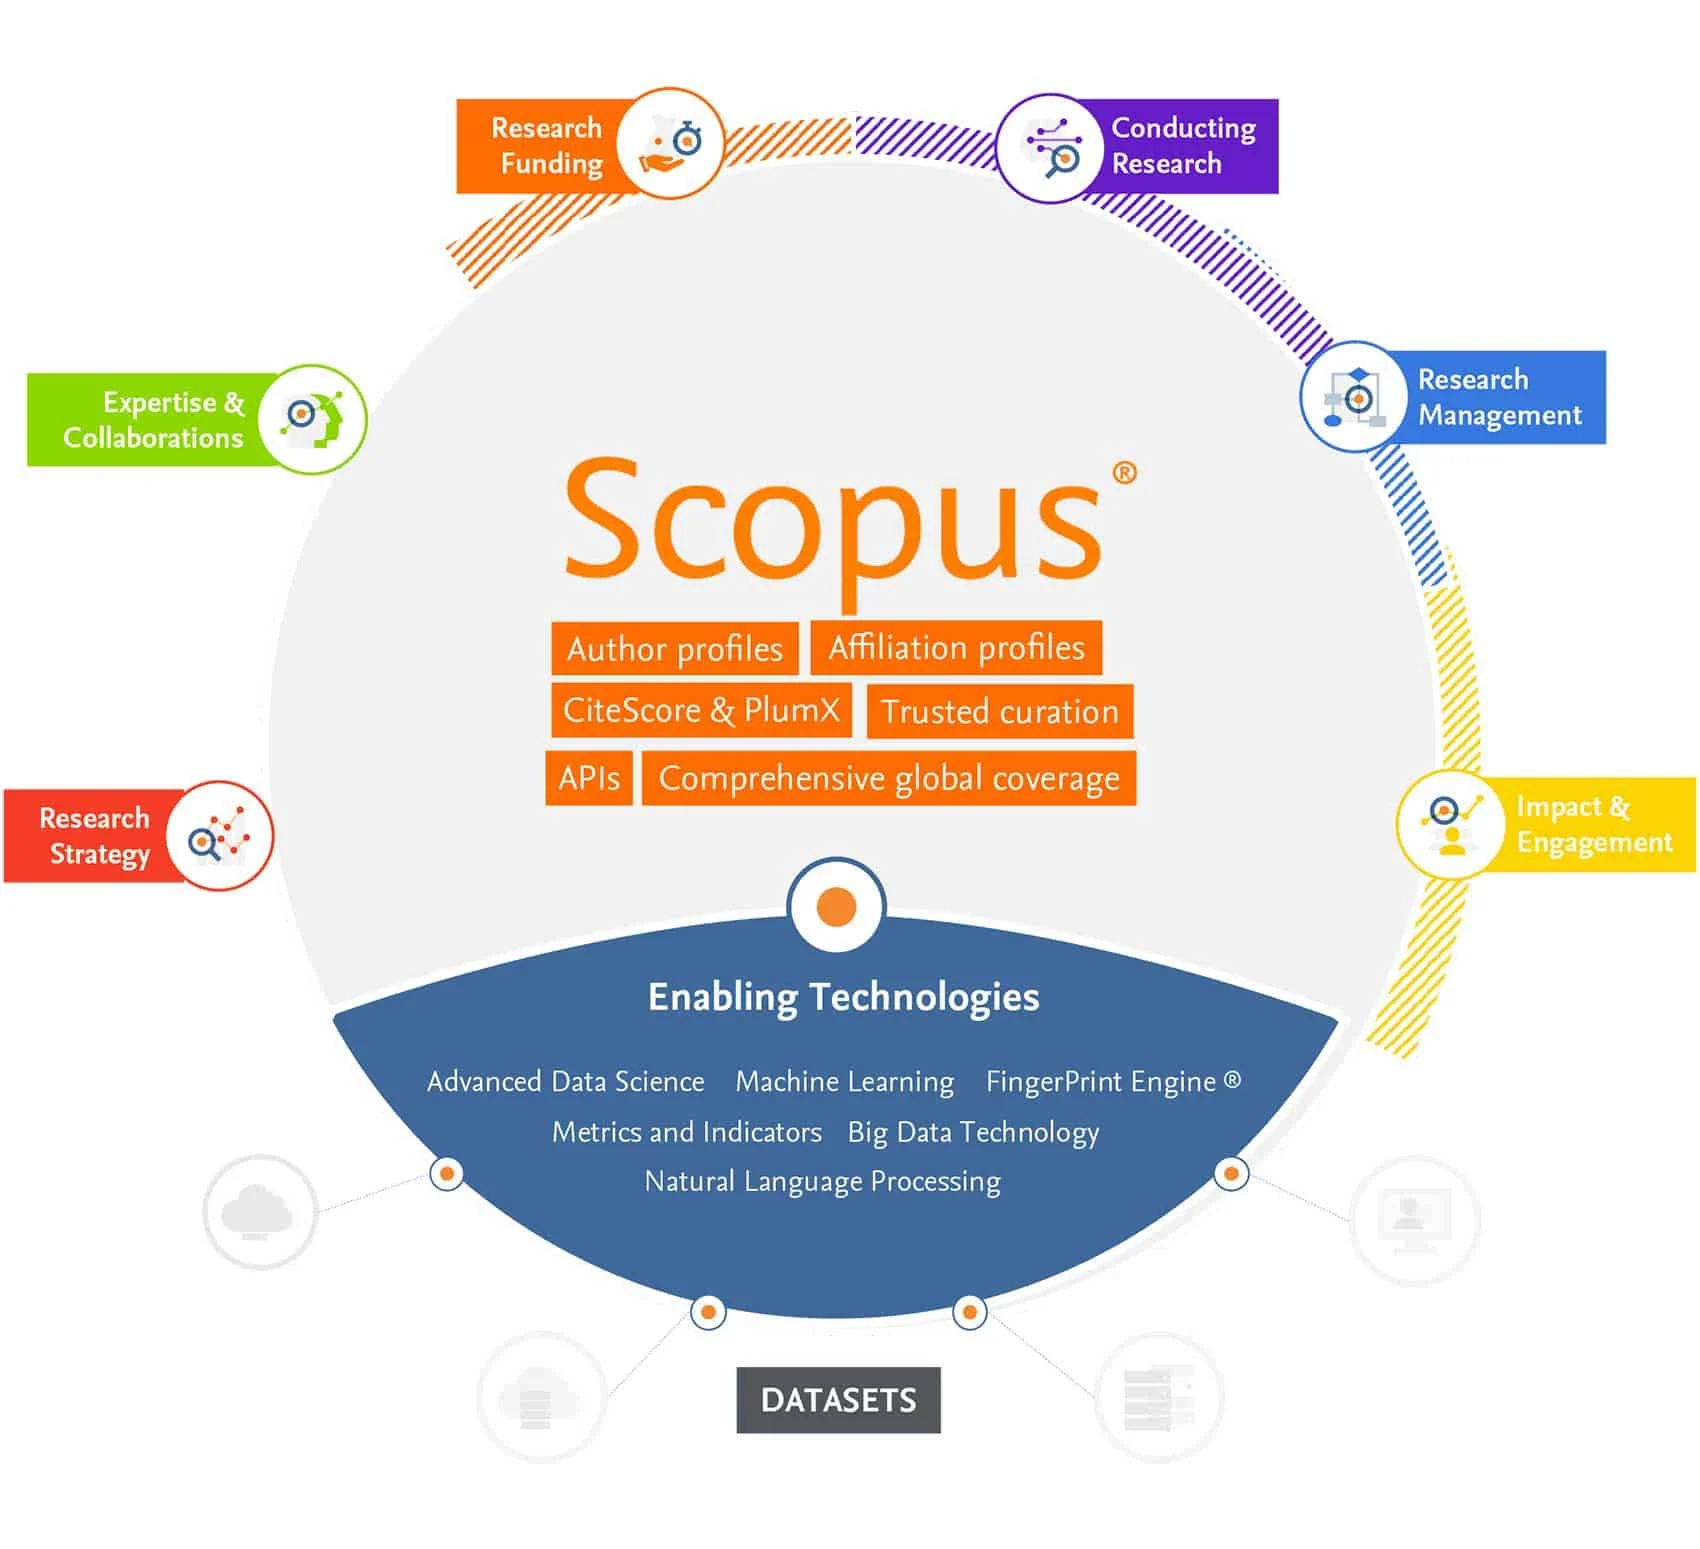 progress, evaluate and reflect with Scopus